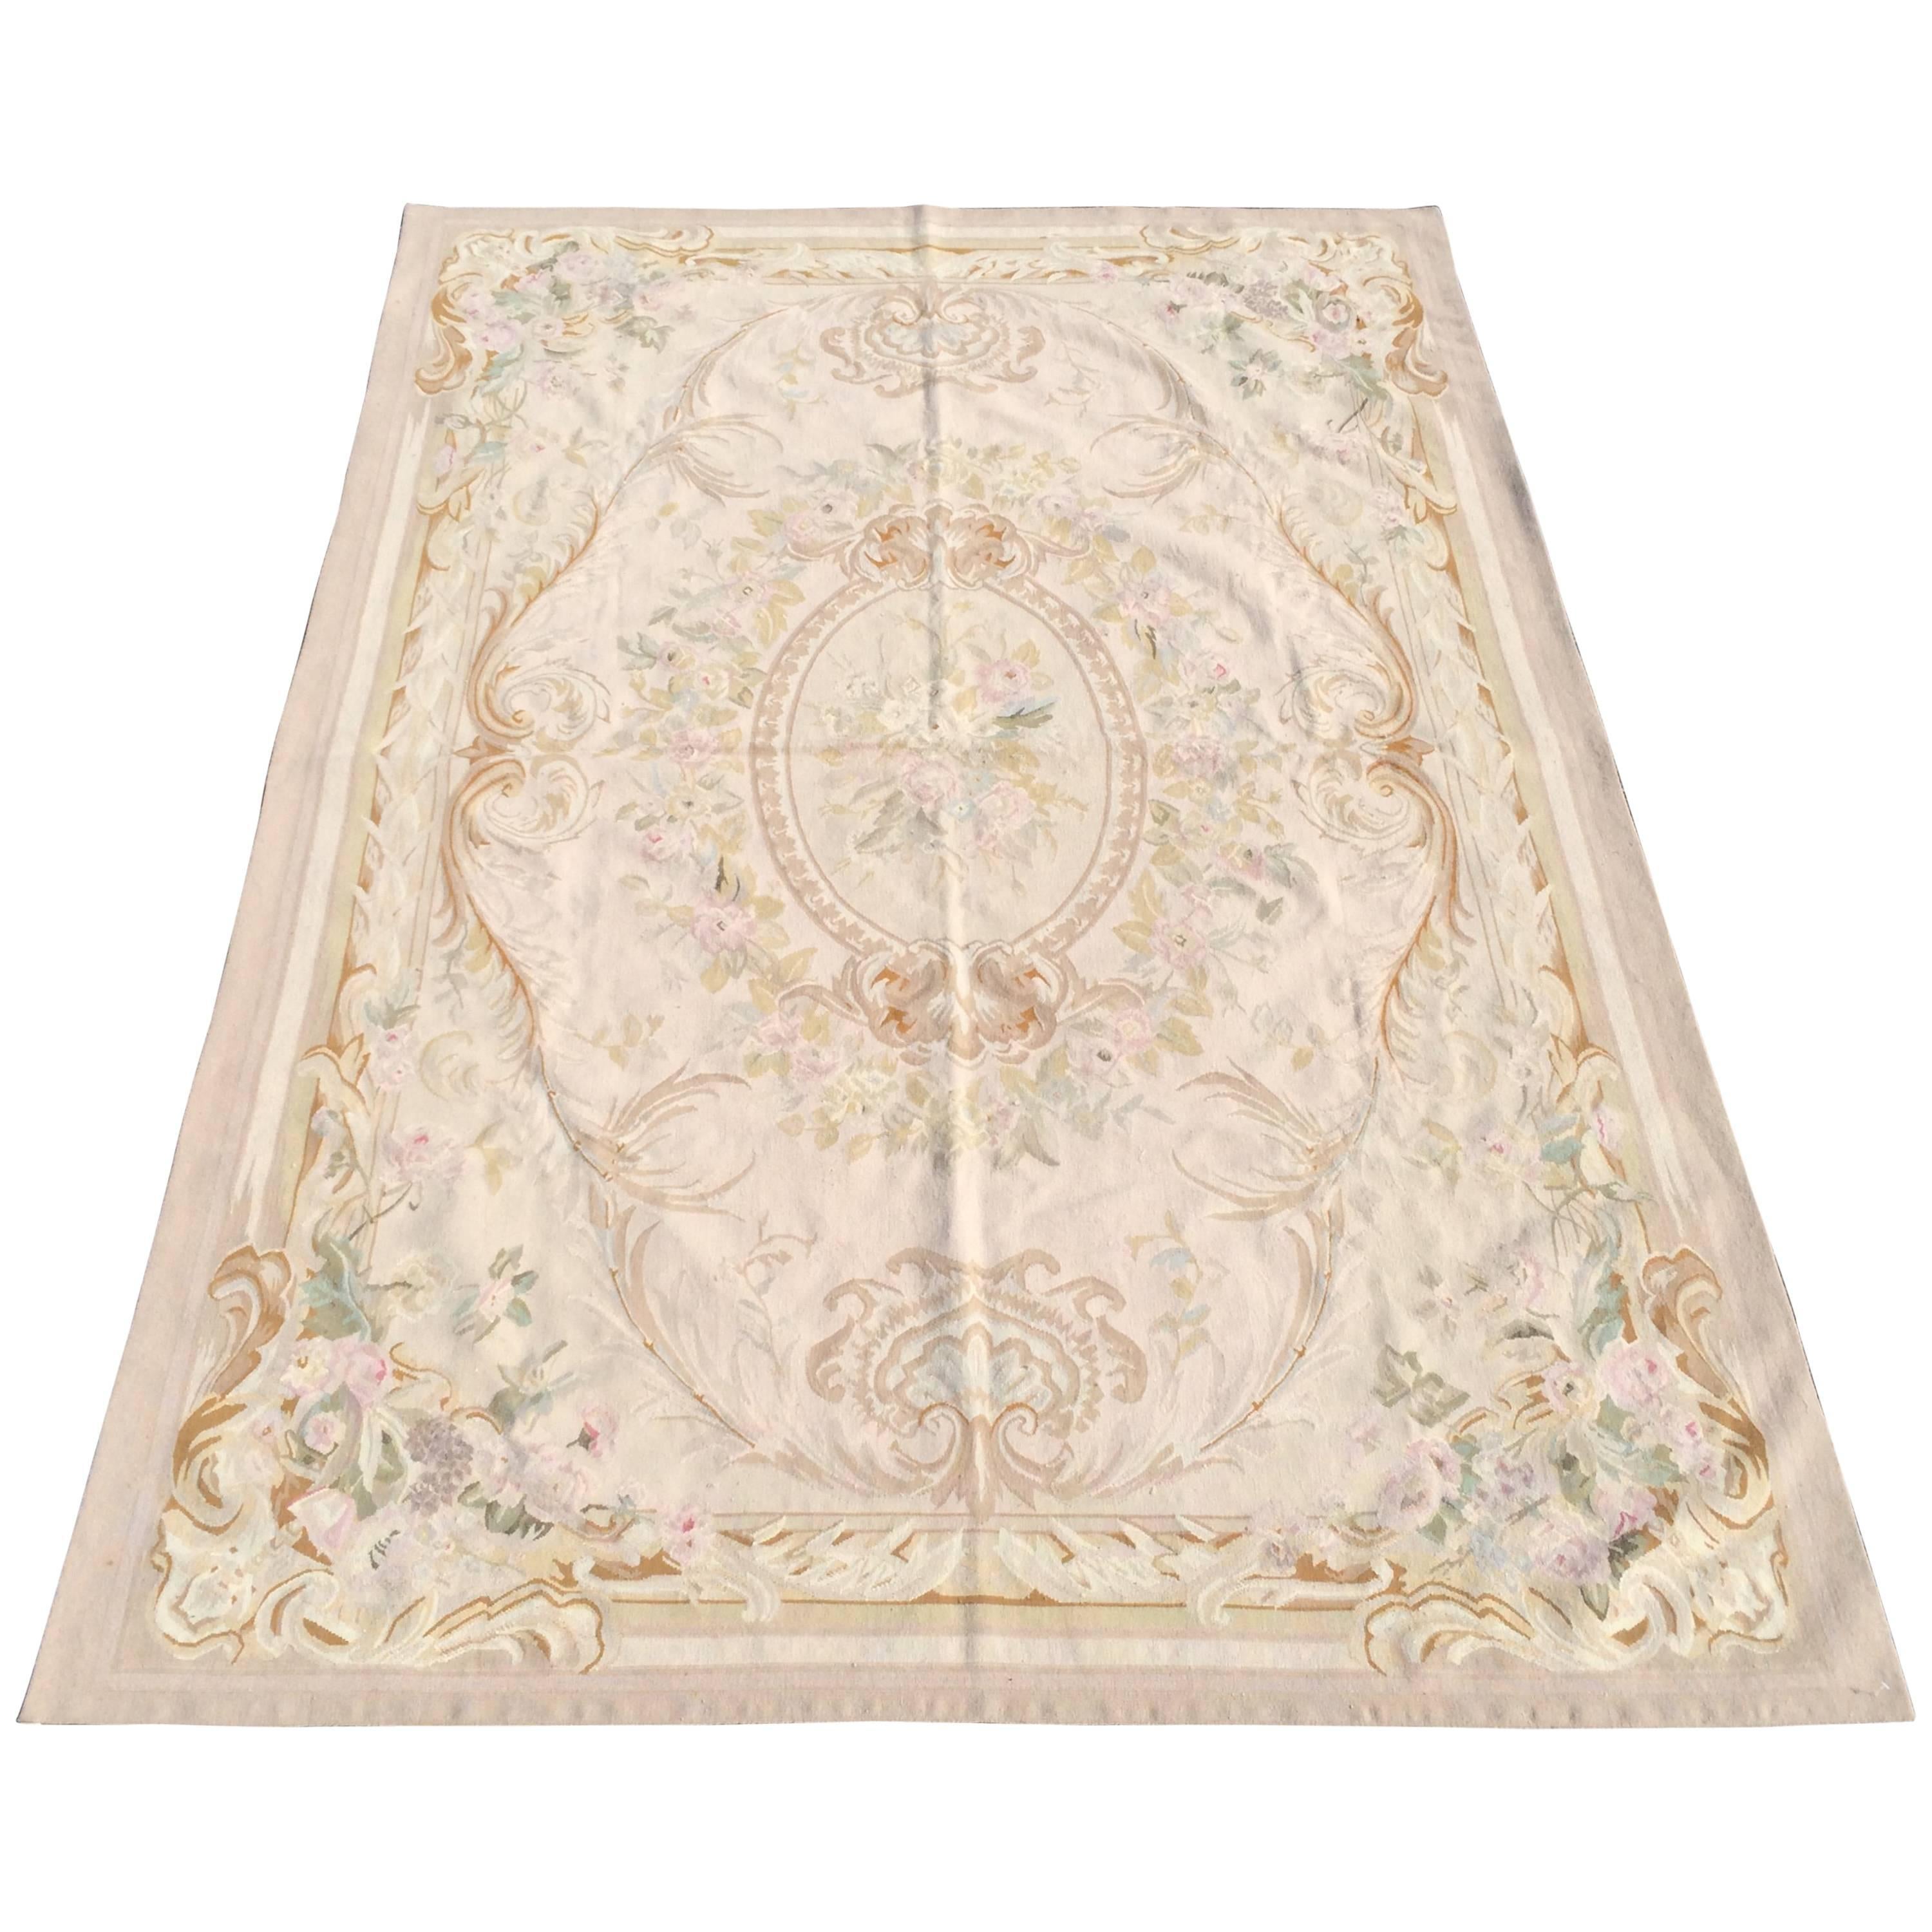 Pale Tone Aubusson Rug, New with Tags 6'x9'